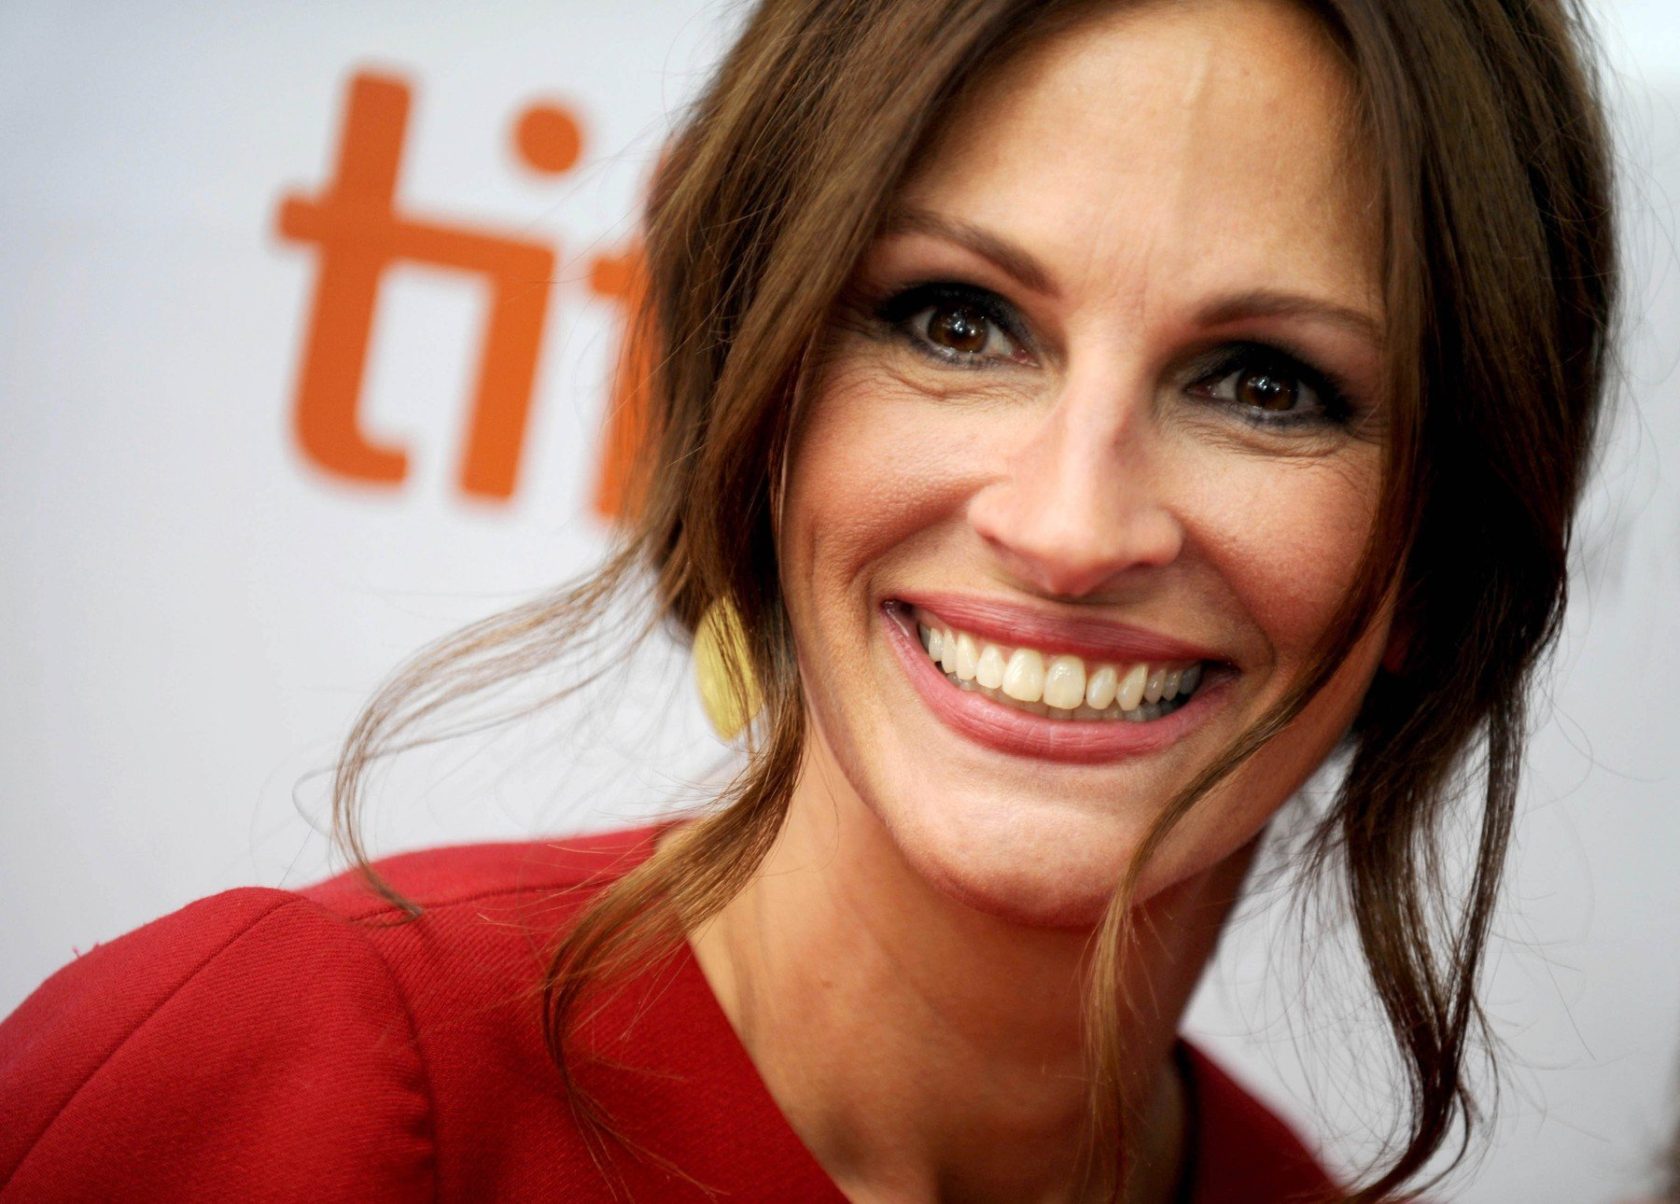 Julia Roberts at the premiere of "August: Osage County" at The Toronto Film Festival. (Canada), Image: 171694430, License: Rights-managed, Restrictions: , Model Release: no, Credit line: Profimedia, StarMax